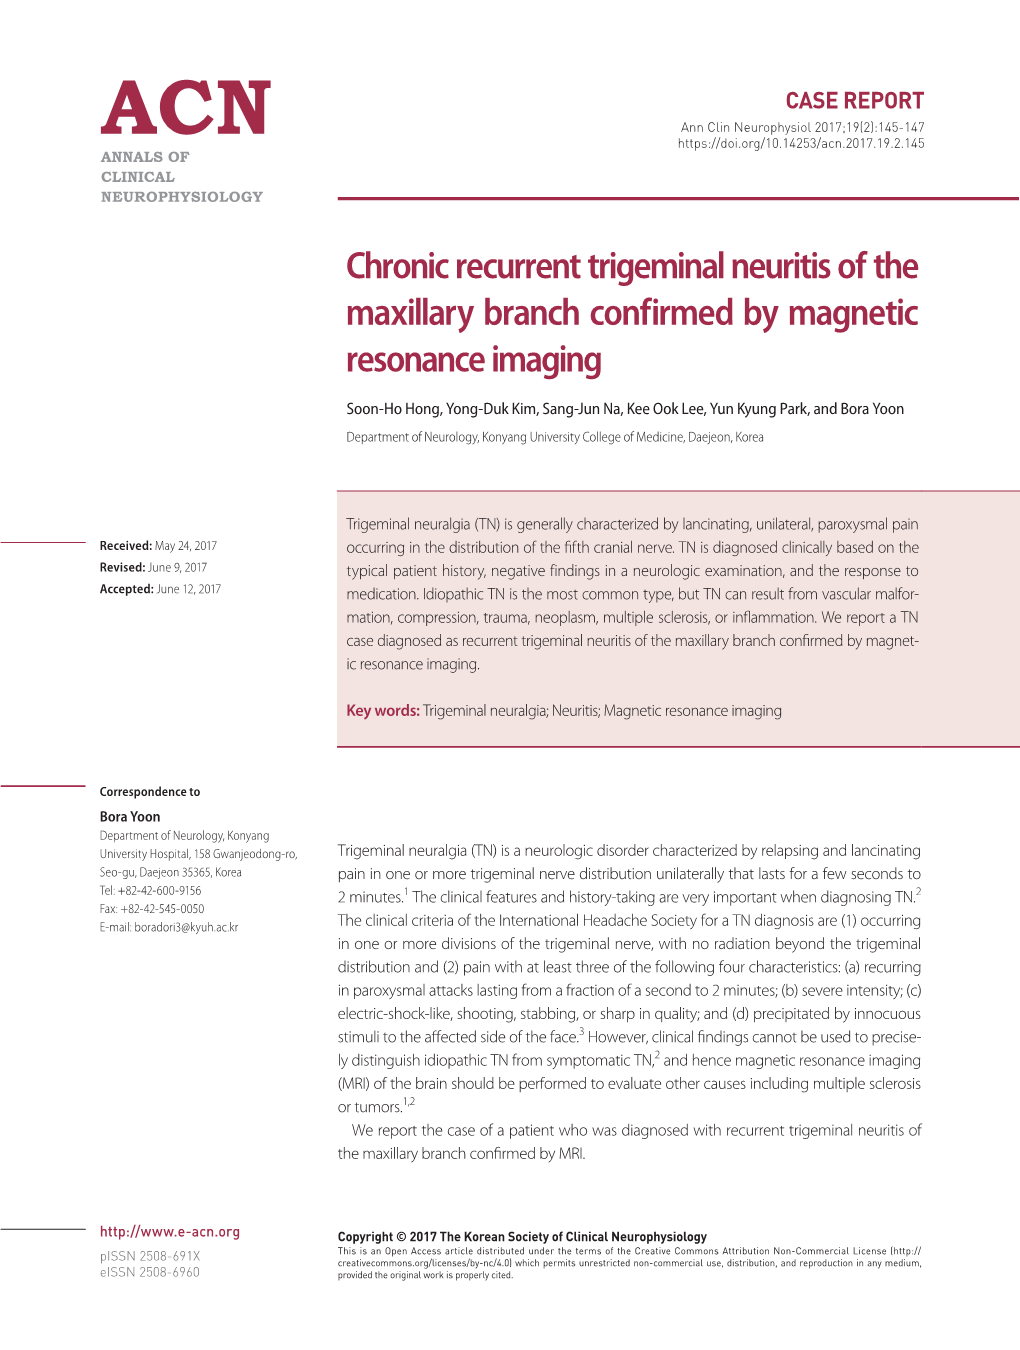 Chronic Recurrent Trigeminal Neuritis of the Maxillary Branch Confirmed by Magnetic Resonance Imaging